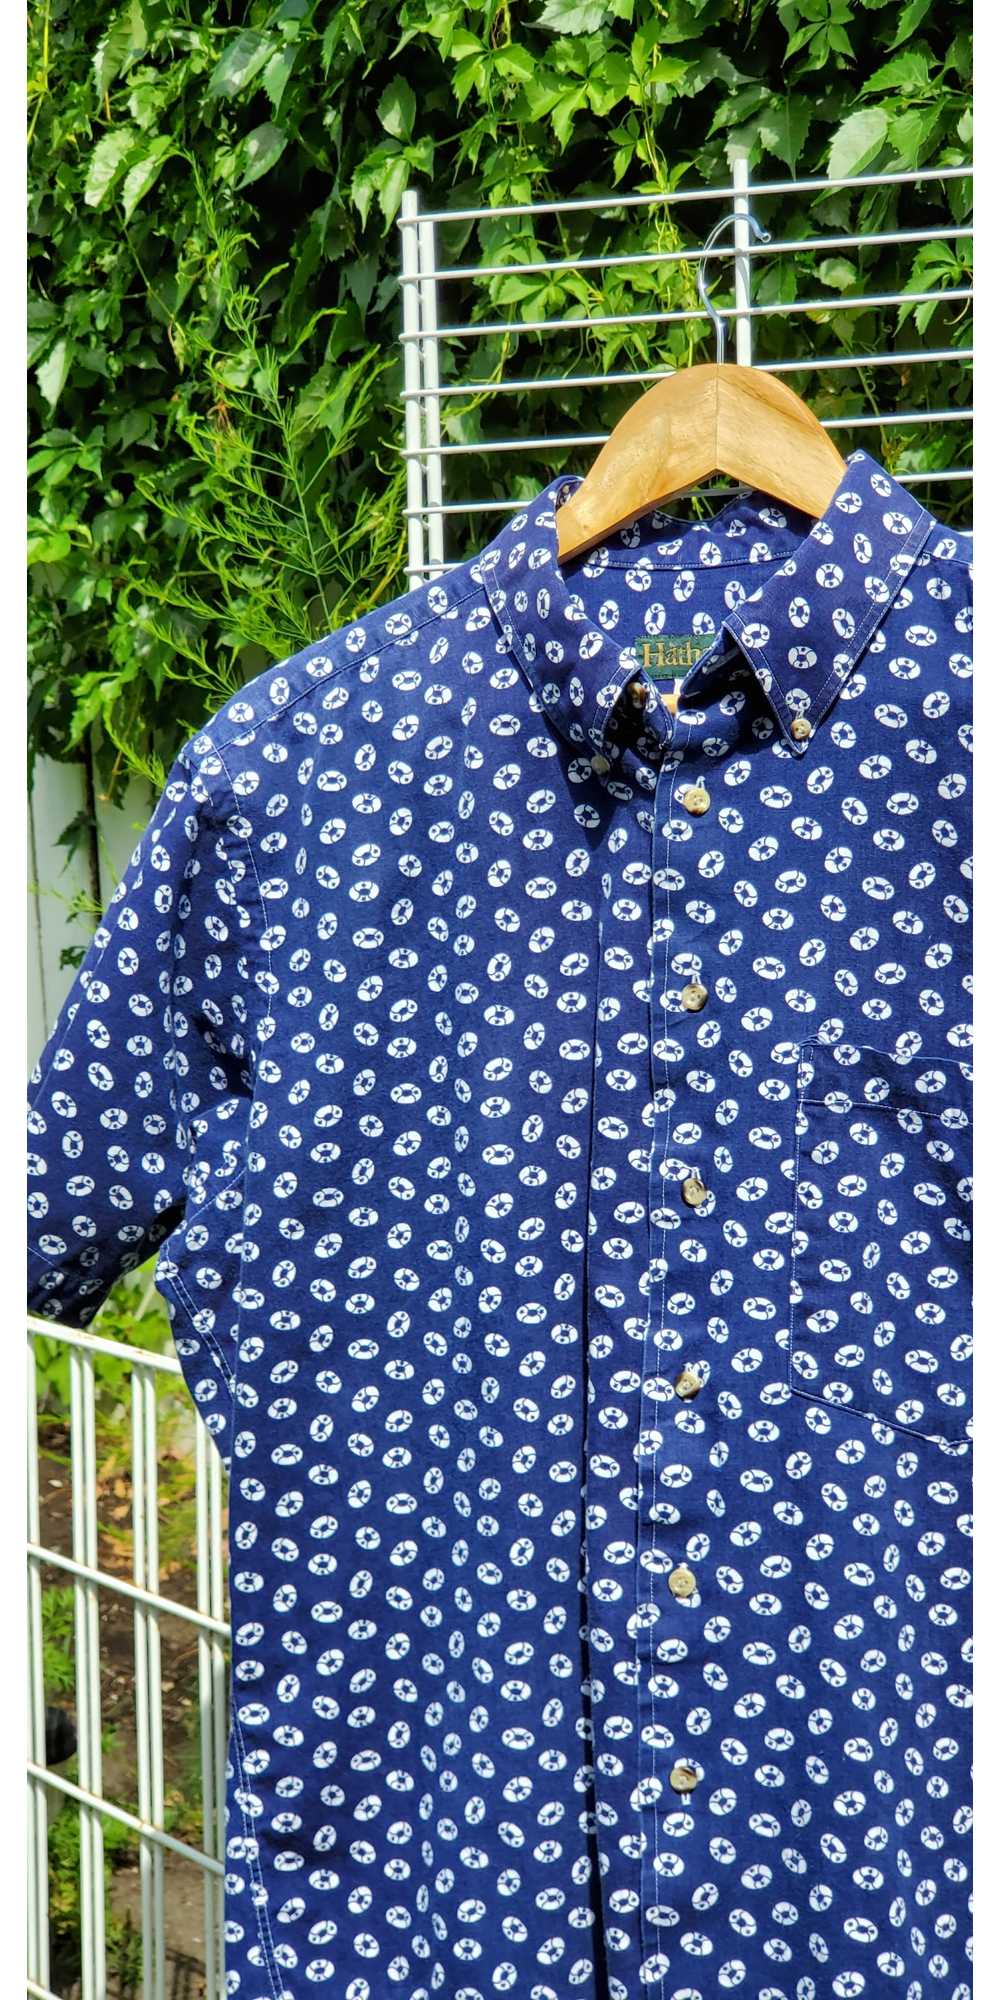 Hathaway Golf Hathaway Blue Button Up - image 3